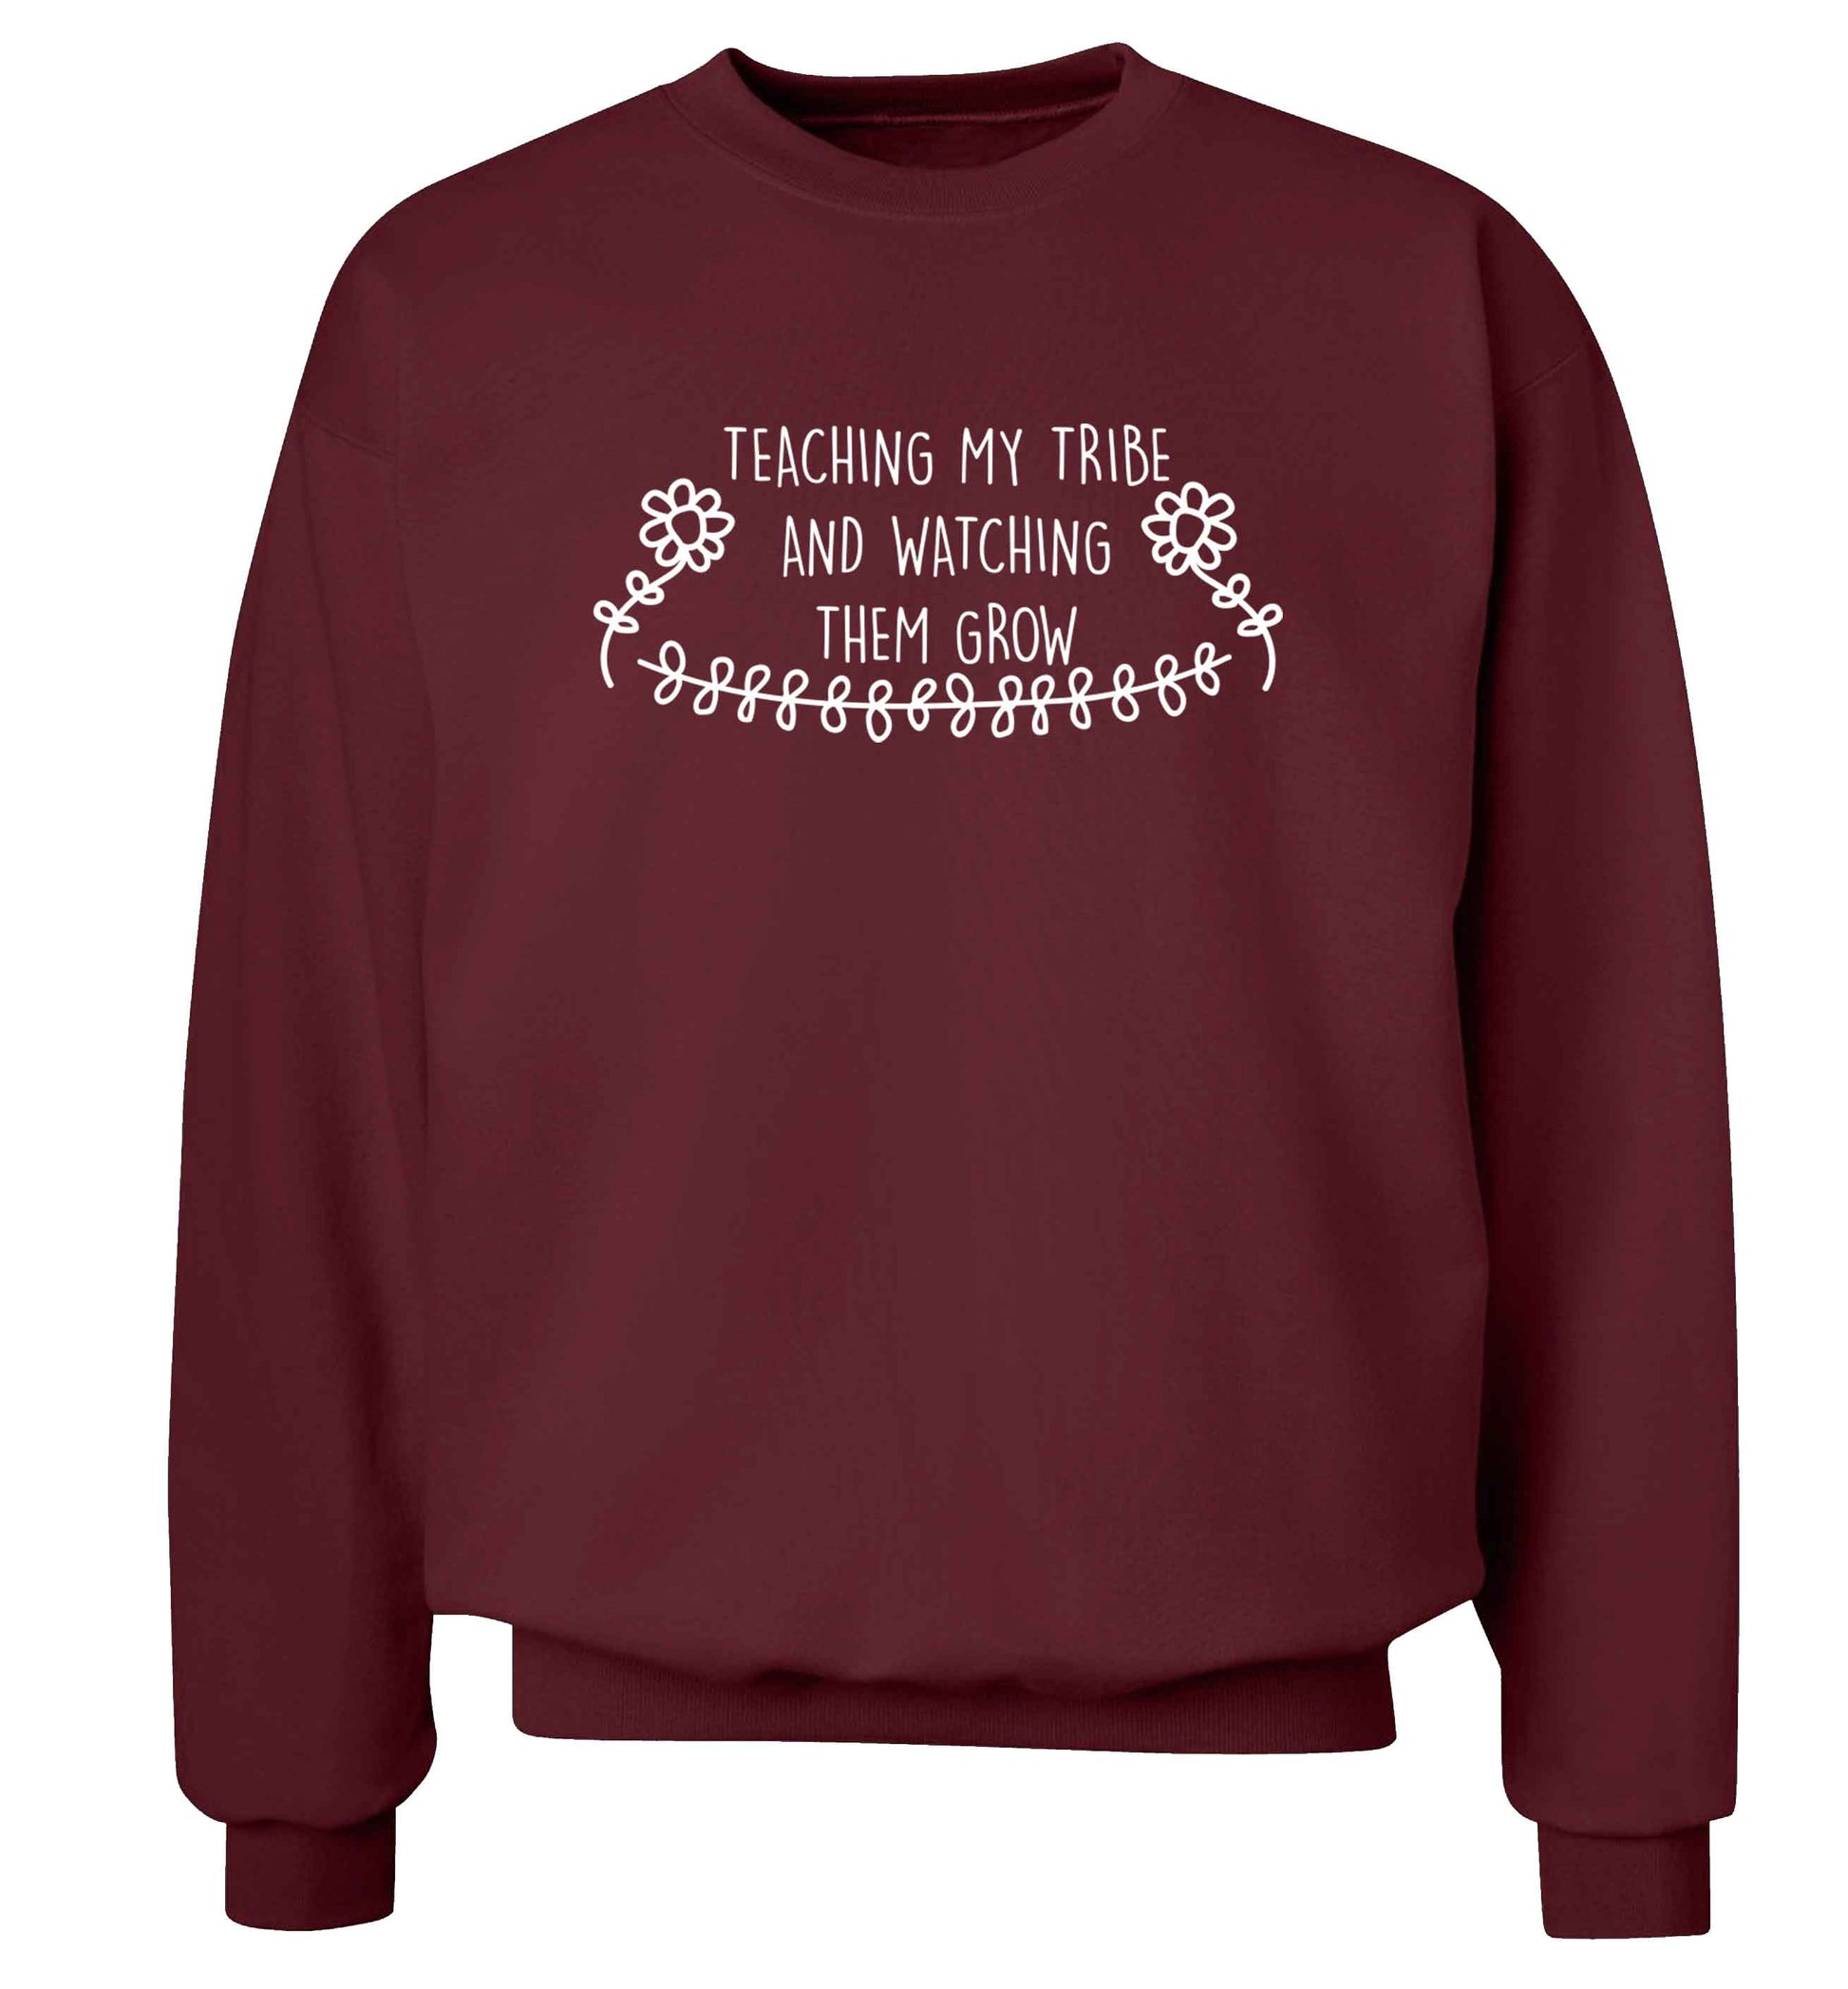 Teaching my tribe and watching them grow Adult's unisex maroon Sweater 2XL